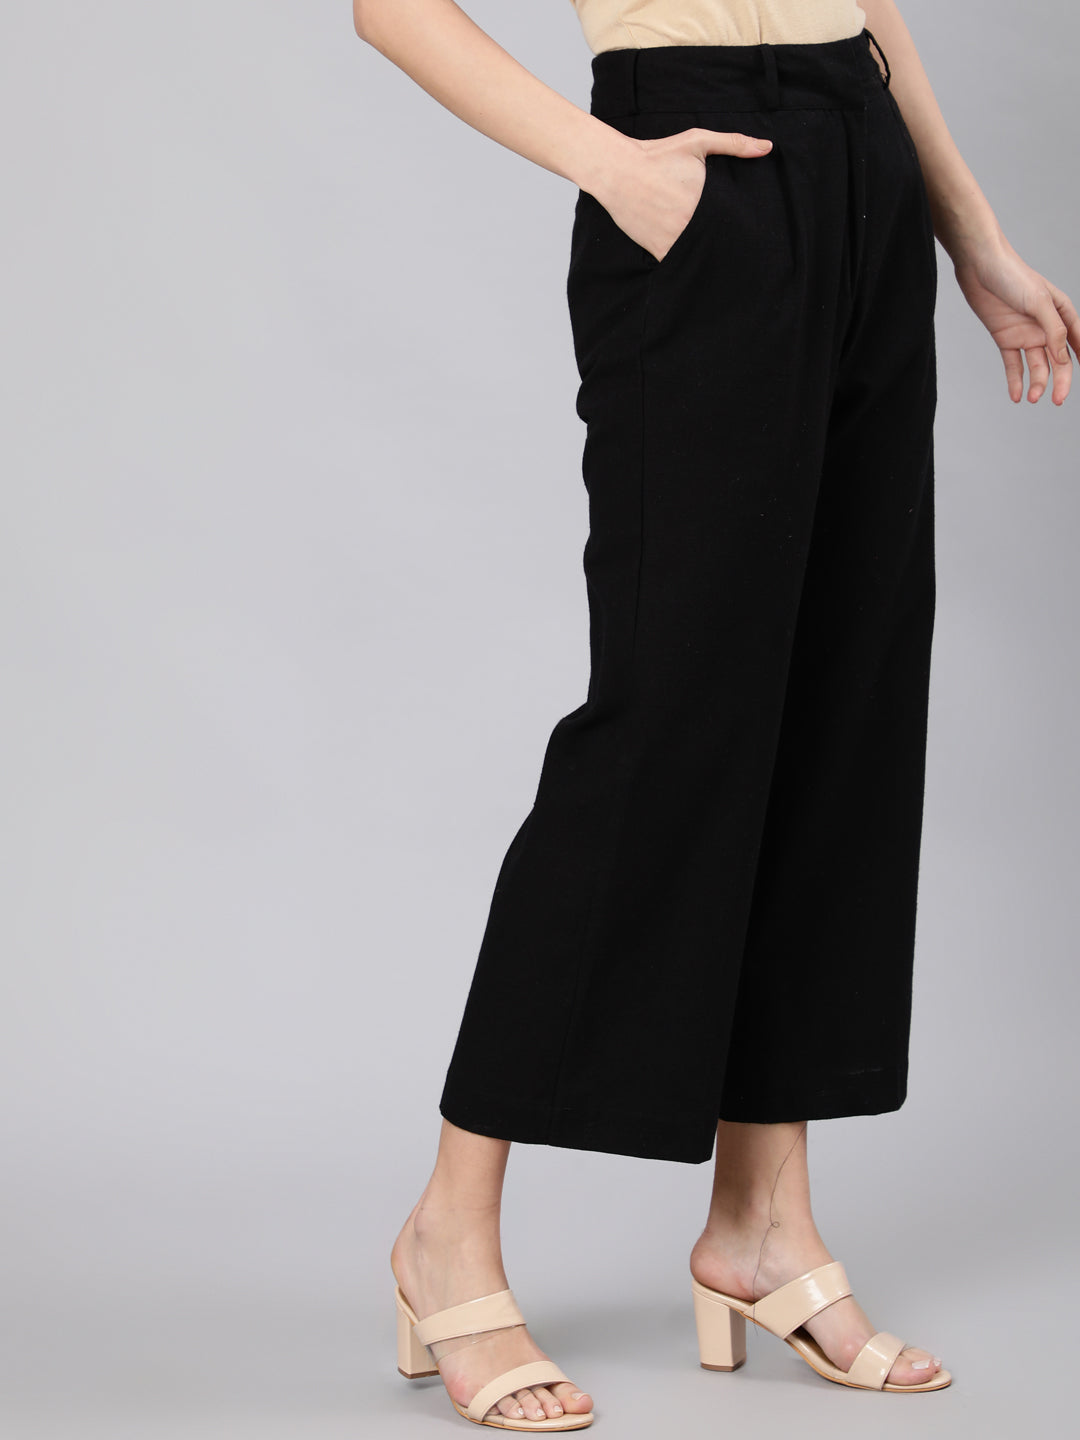 Off White Cotton Slub Flared High Rise Parallel Pants, 55% OFF